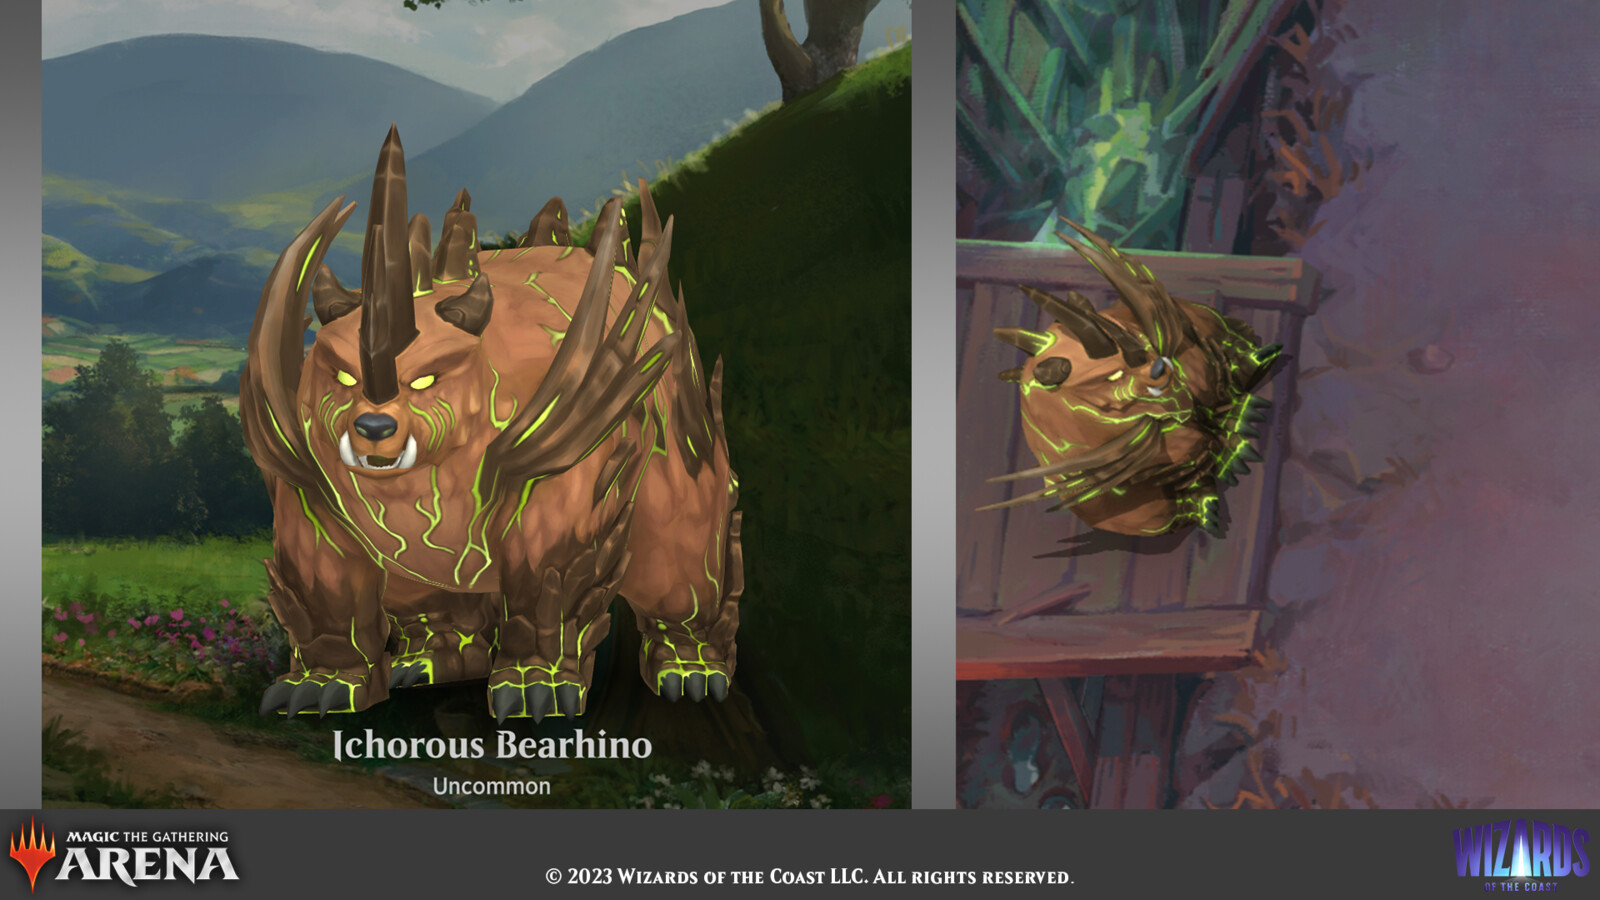 Select pet and game views for the Ichorous Bearhino